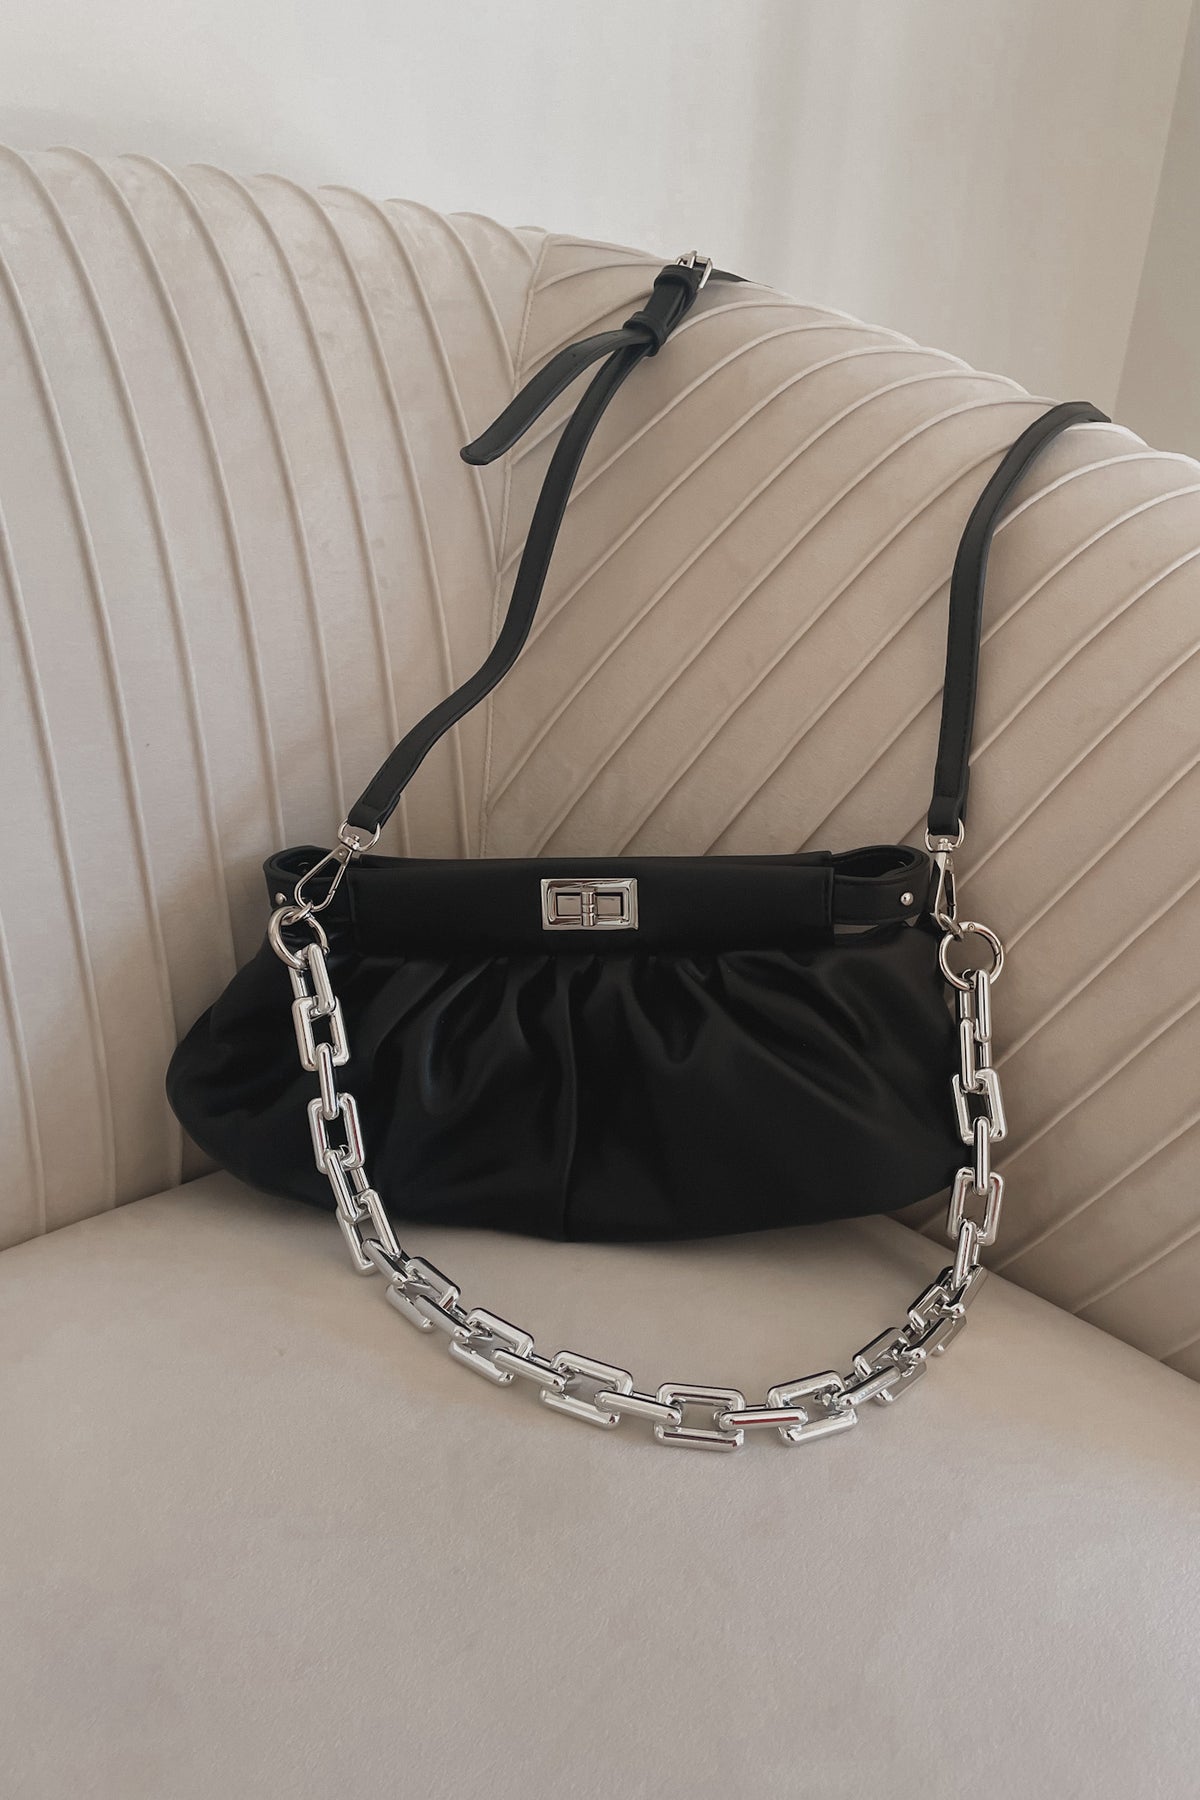 Makeup, Hairs, Outfits, And More - The Fendi Baguette Bag Lily